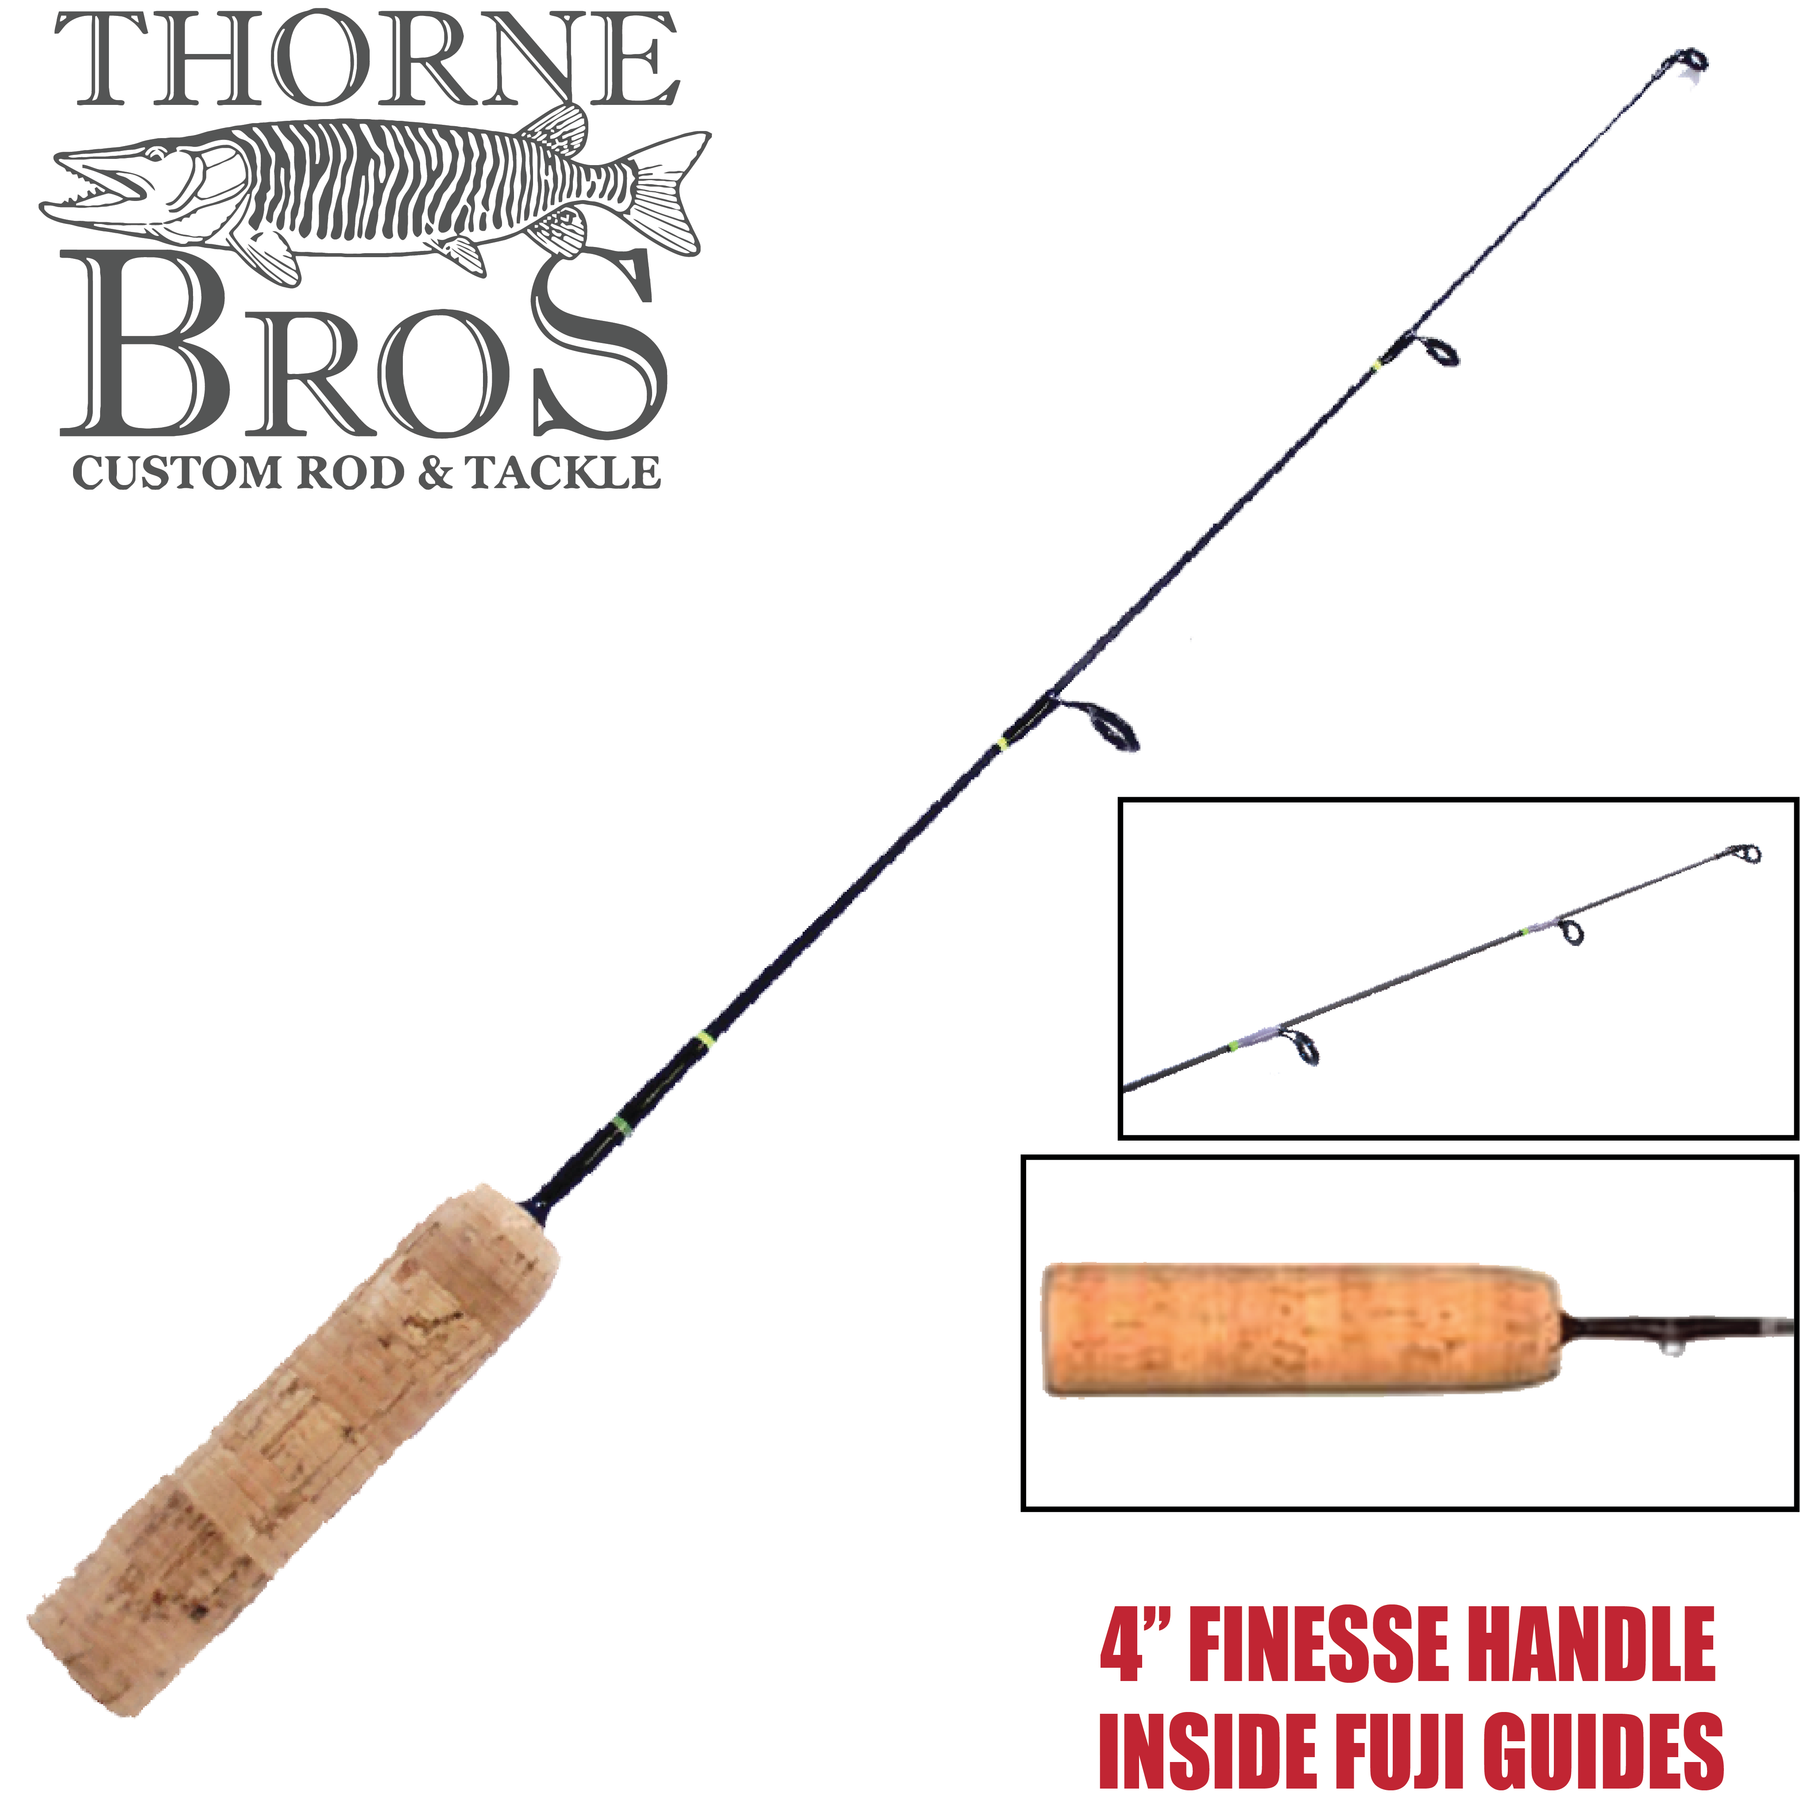 Thorne Brothers Custom Ice Rod - Crappie Chronicles Pink's Chronicle